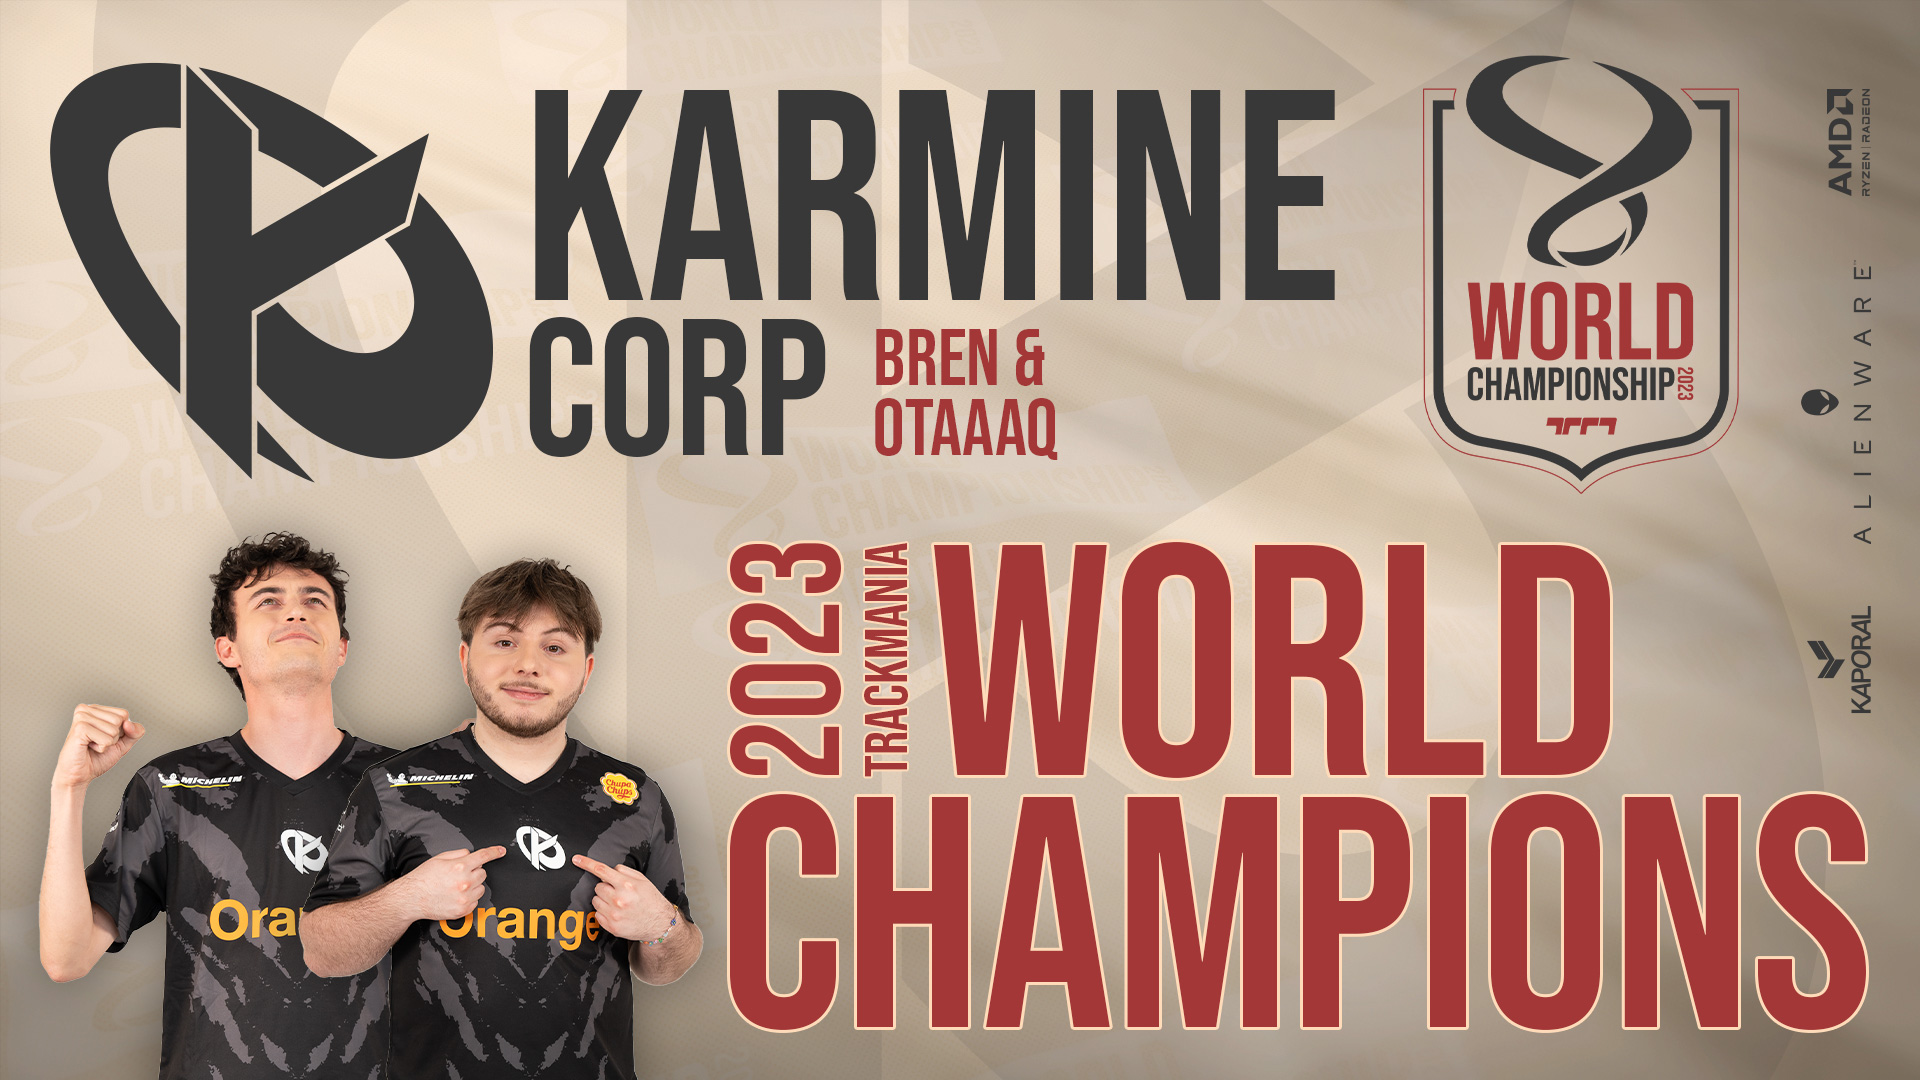 Karmine Corp – bren and Otaaaq are the Trackmania 2023 World Champions